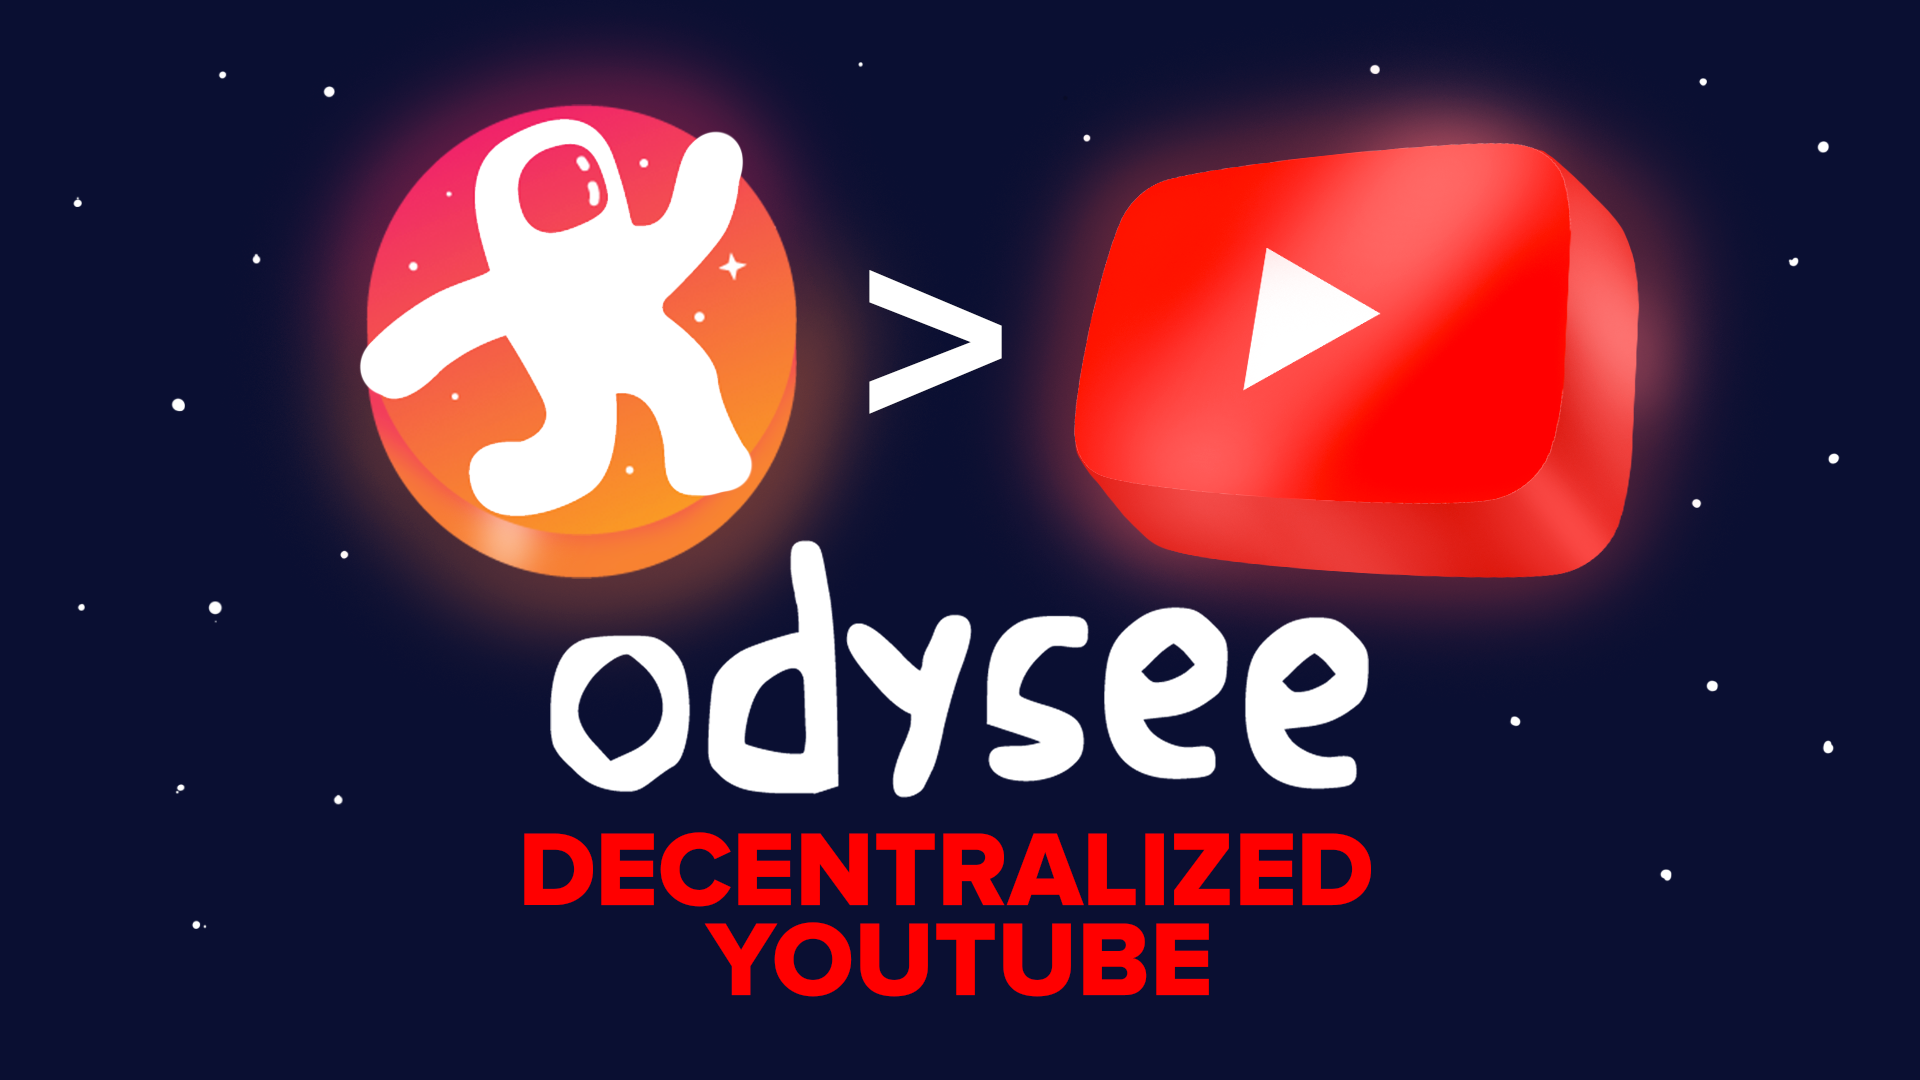 Odysee - Watch Video and Earn Crypto